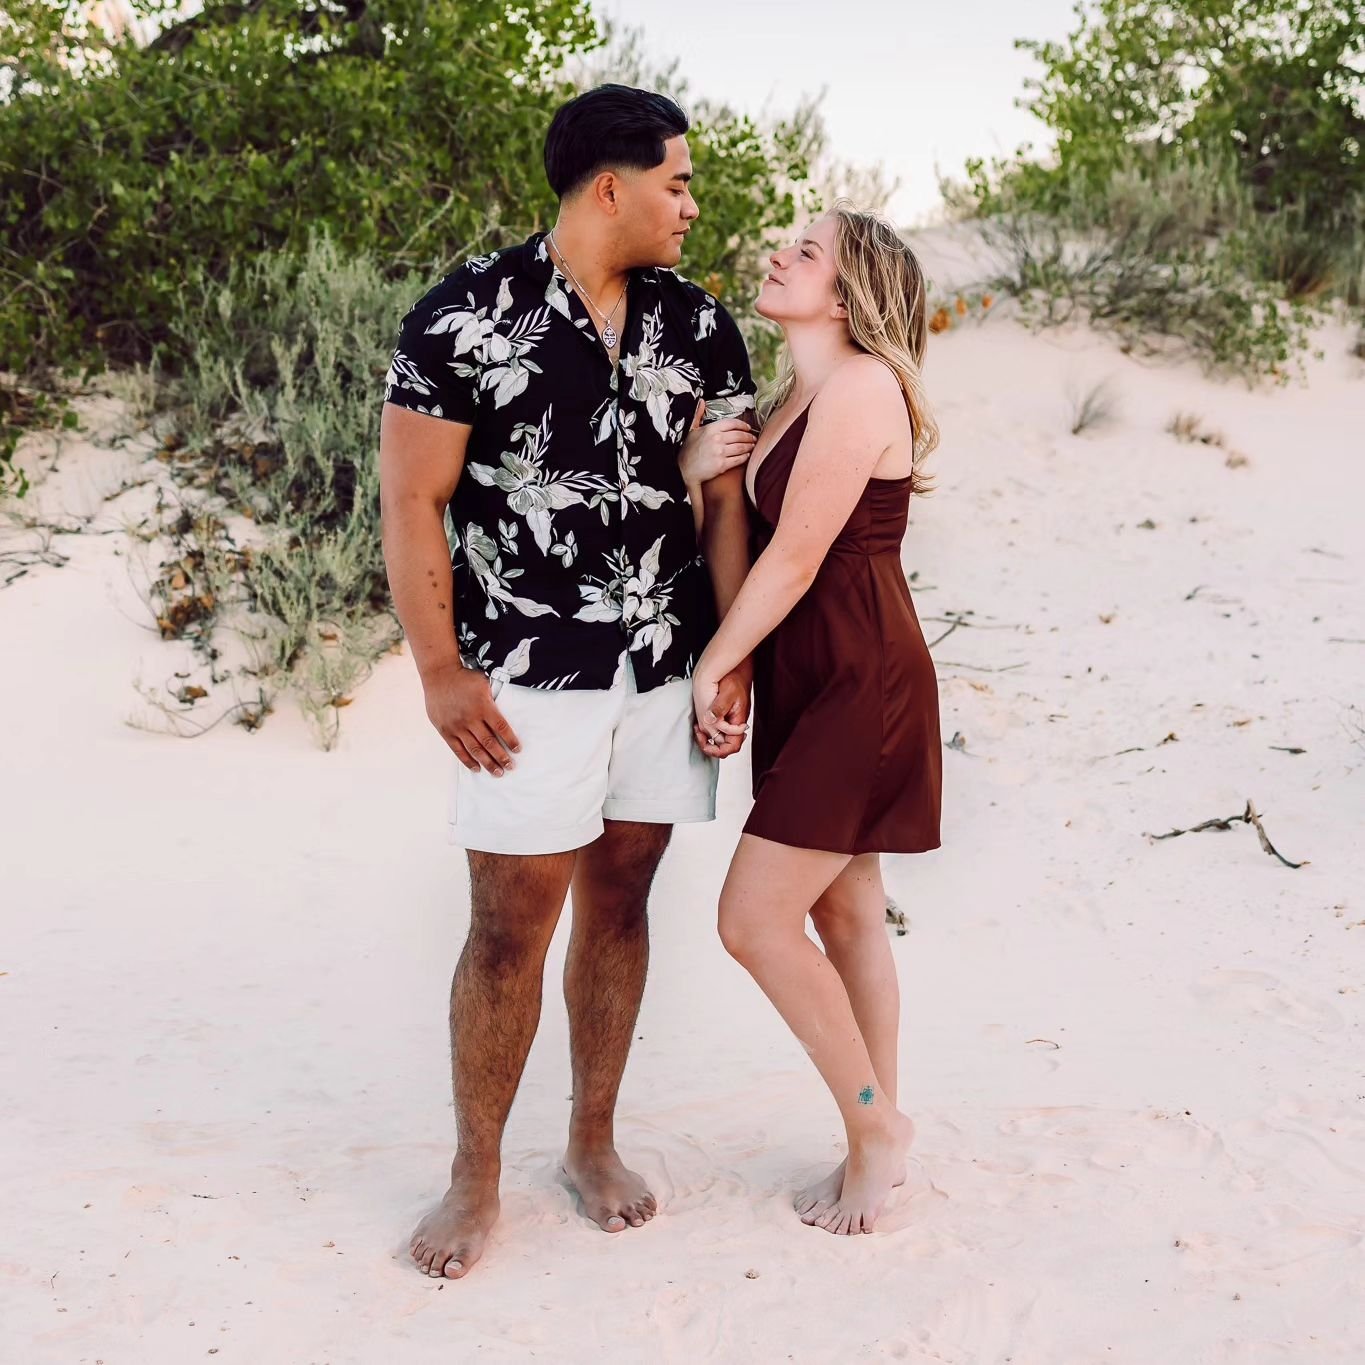 ✨Elopement bliss at White Sands✨
This beautiful couple was a blast to work with. 
She's from Utah &amp; he's from Guam. They fell in love with white sands after visiting &amp; had to have their elopement photos done there 🥰 I am just so honored they